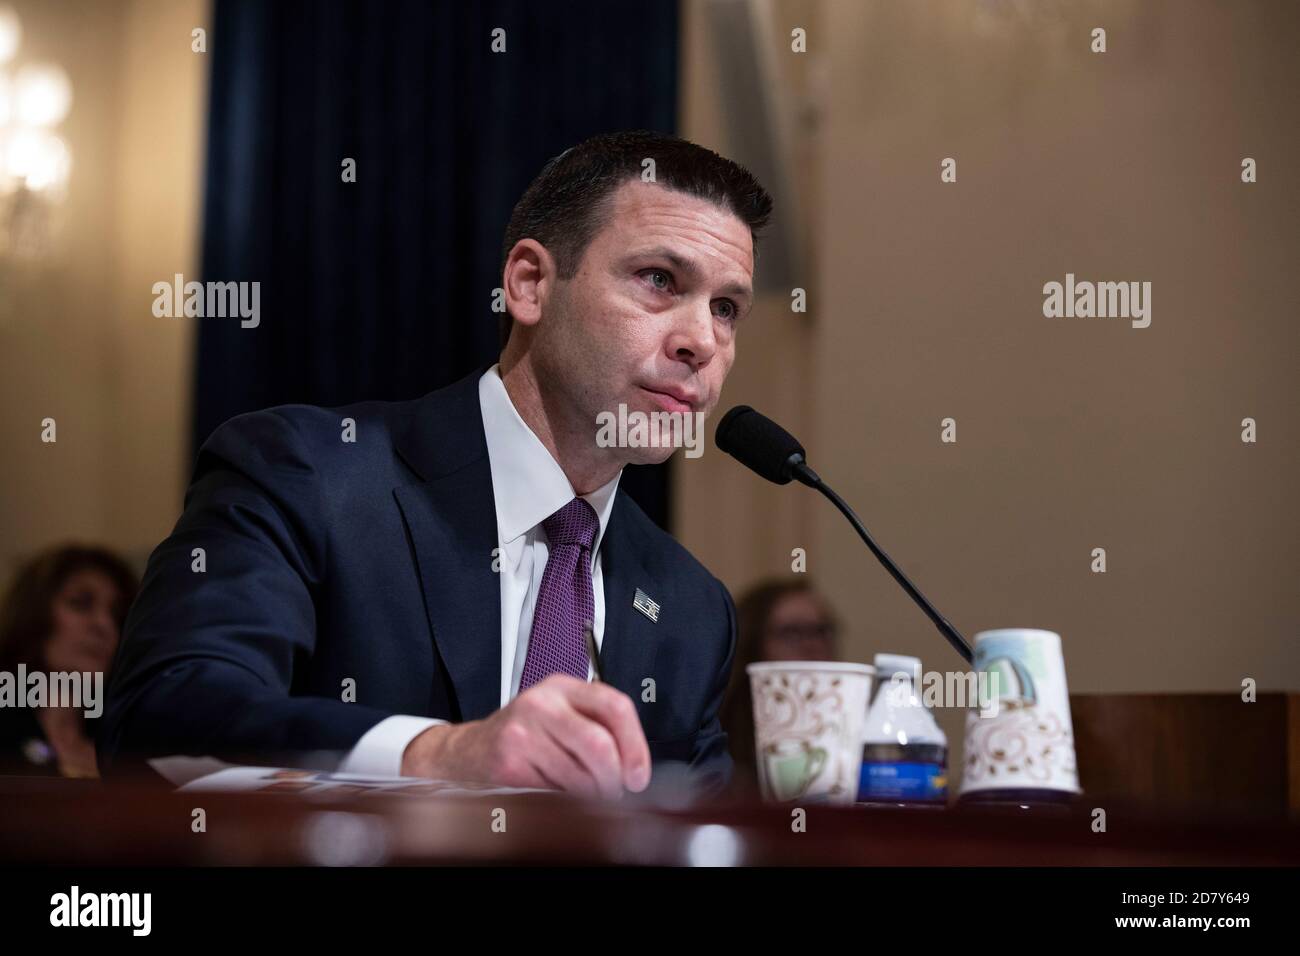 Acting Department of Homeland Security Secretary Kevin McAleenan testifies before the House of Representatives Committee on Homeland Security during a budget oversight hearing on Wednesday, May 22, 2019 on Capitol Hill in Washington, D.C. McAleenan answered questions from committee Democrats about the death of 5 migrant children on the Souther U.S. border. Committee Republicans asked McAleenan about the need for a border wall and increased funding for border security requested by the Trump Administration. Credit: Alex Edelman/The Photo Access Stock Photo